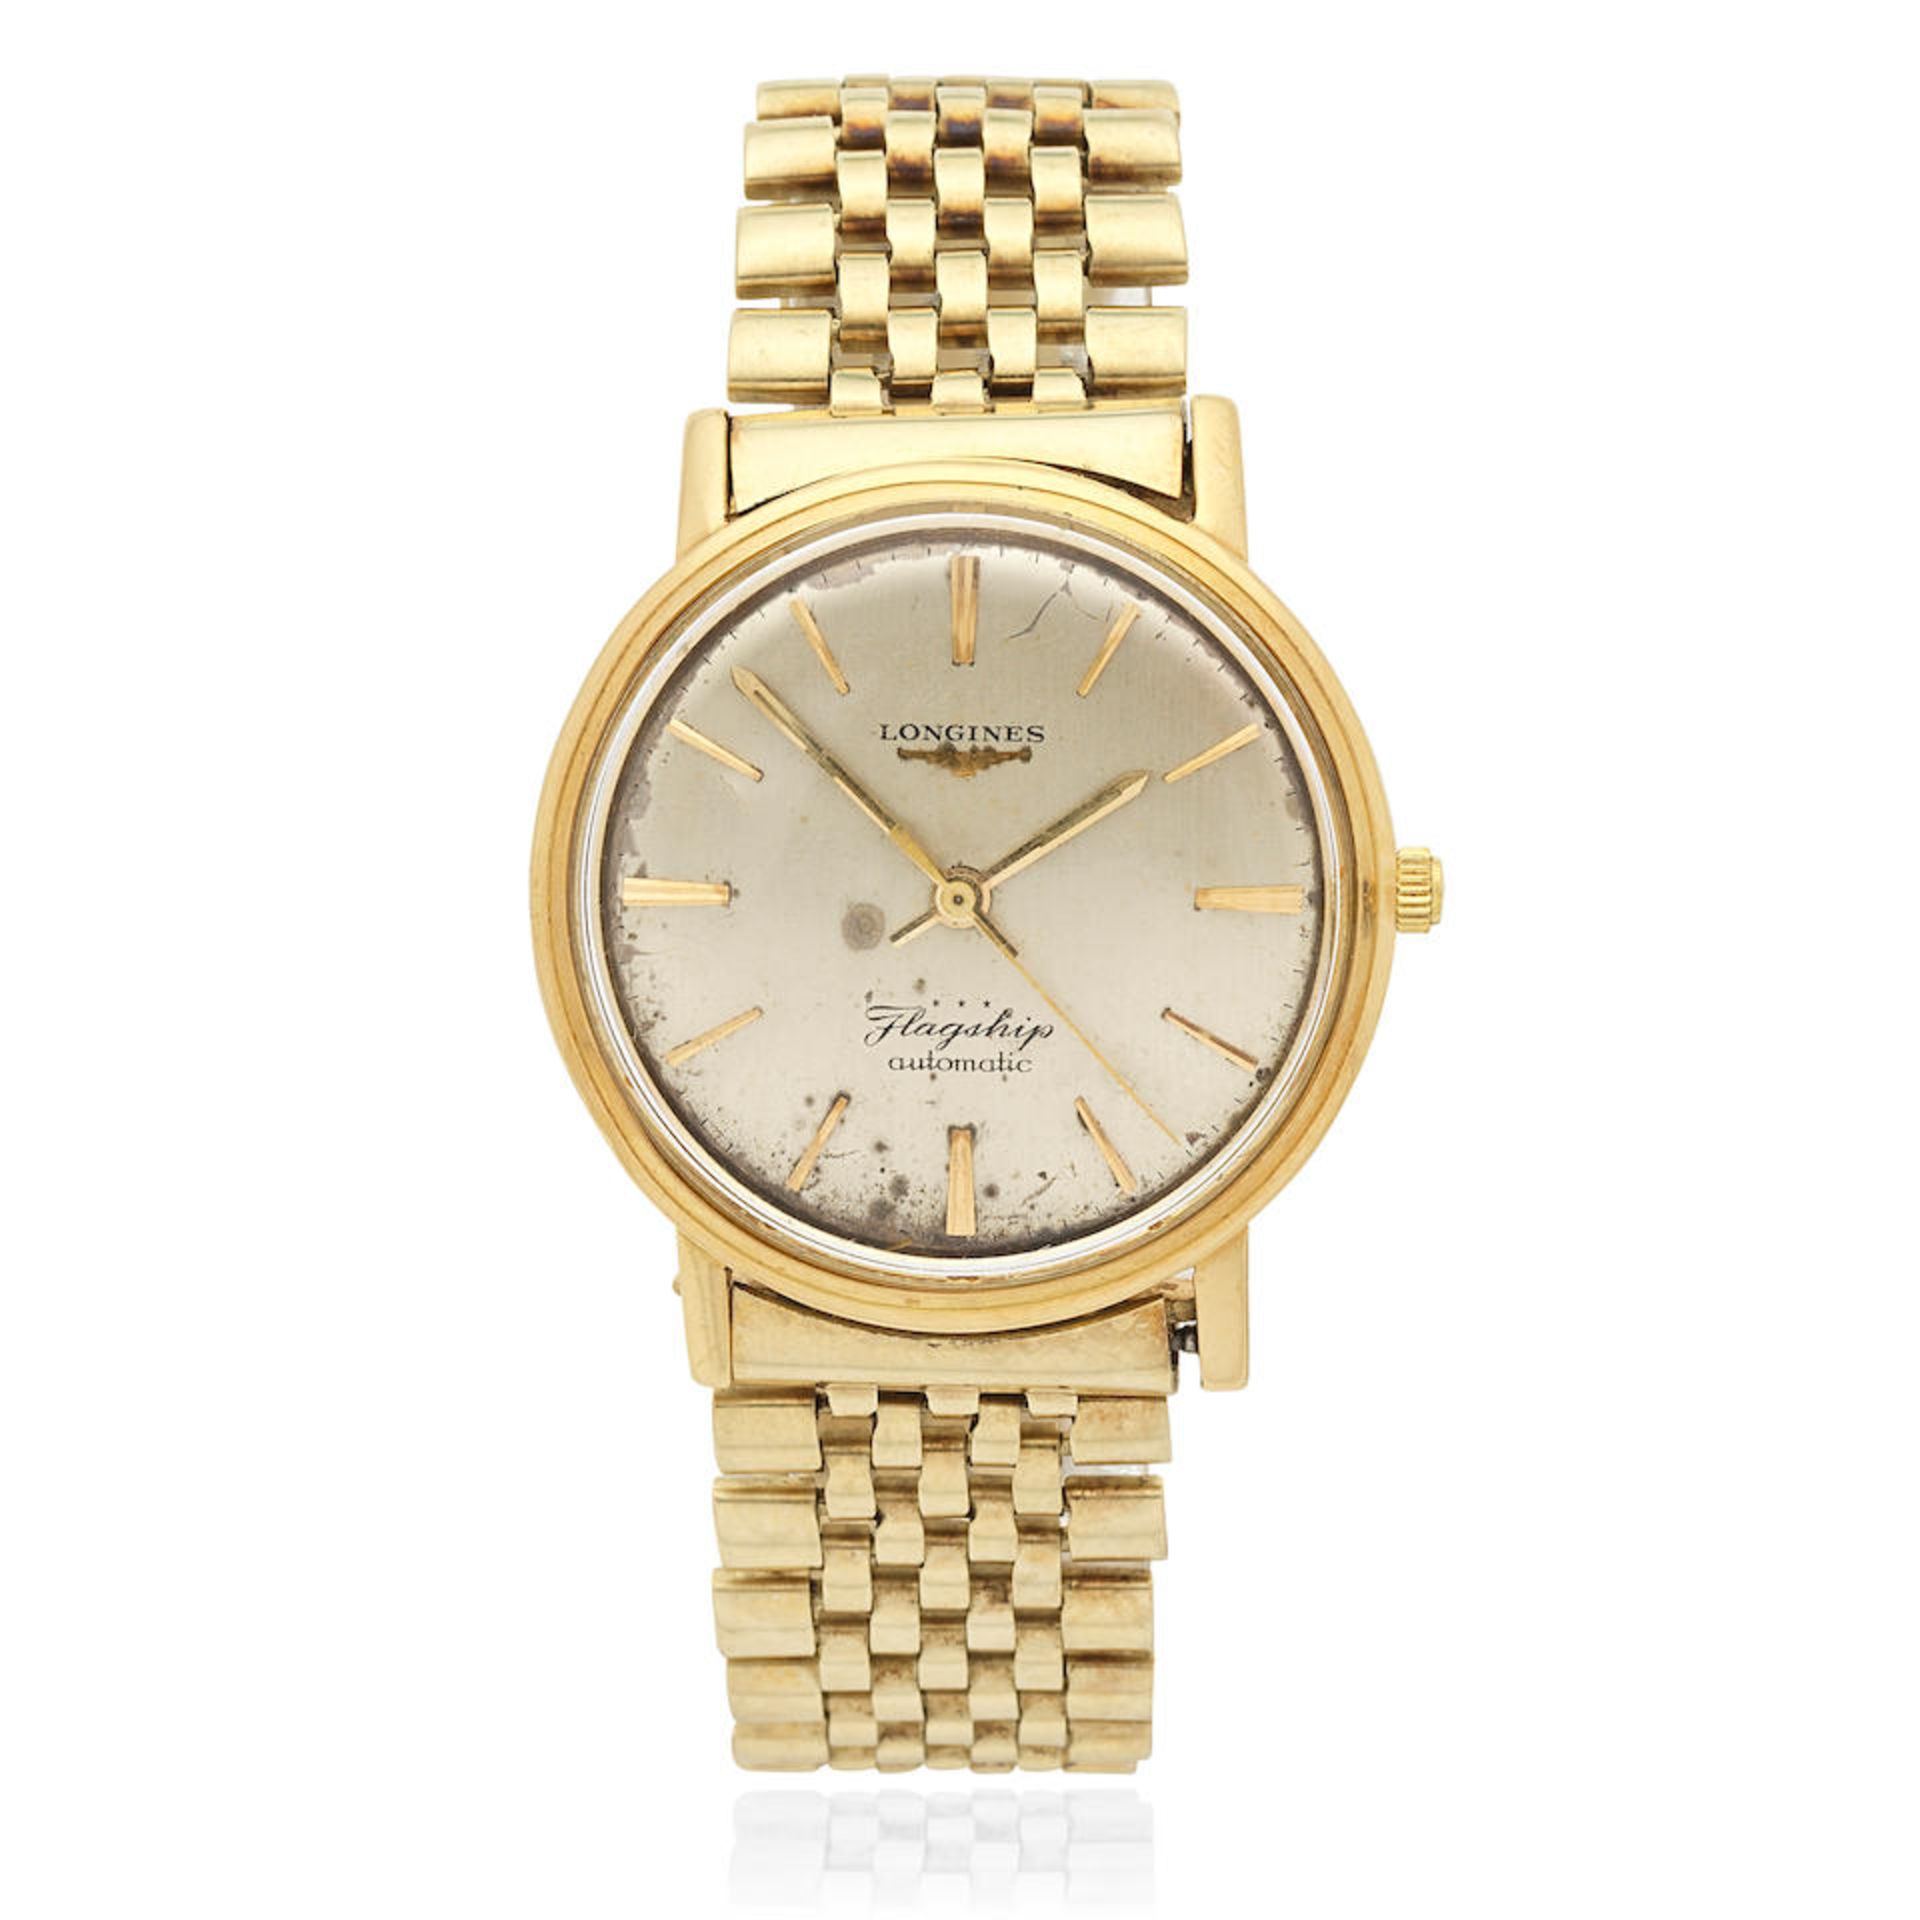 Longines. An 18K gold automatic bracelet watch Flagship Automatic, Ref: 3404, Circa 1961